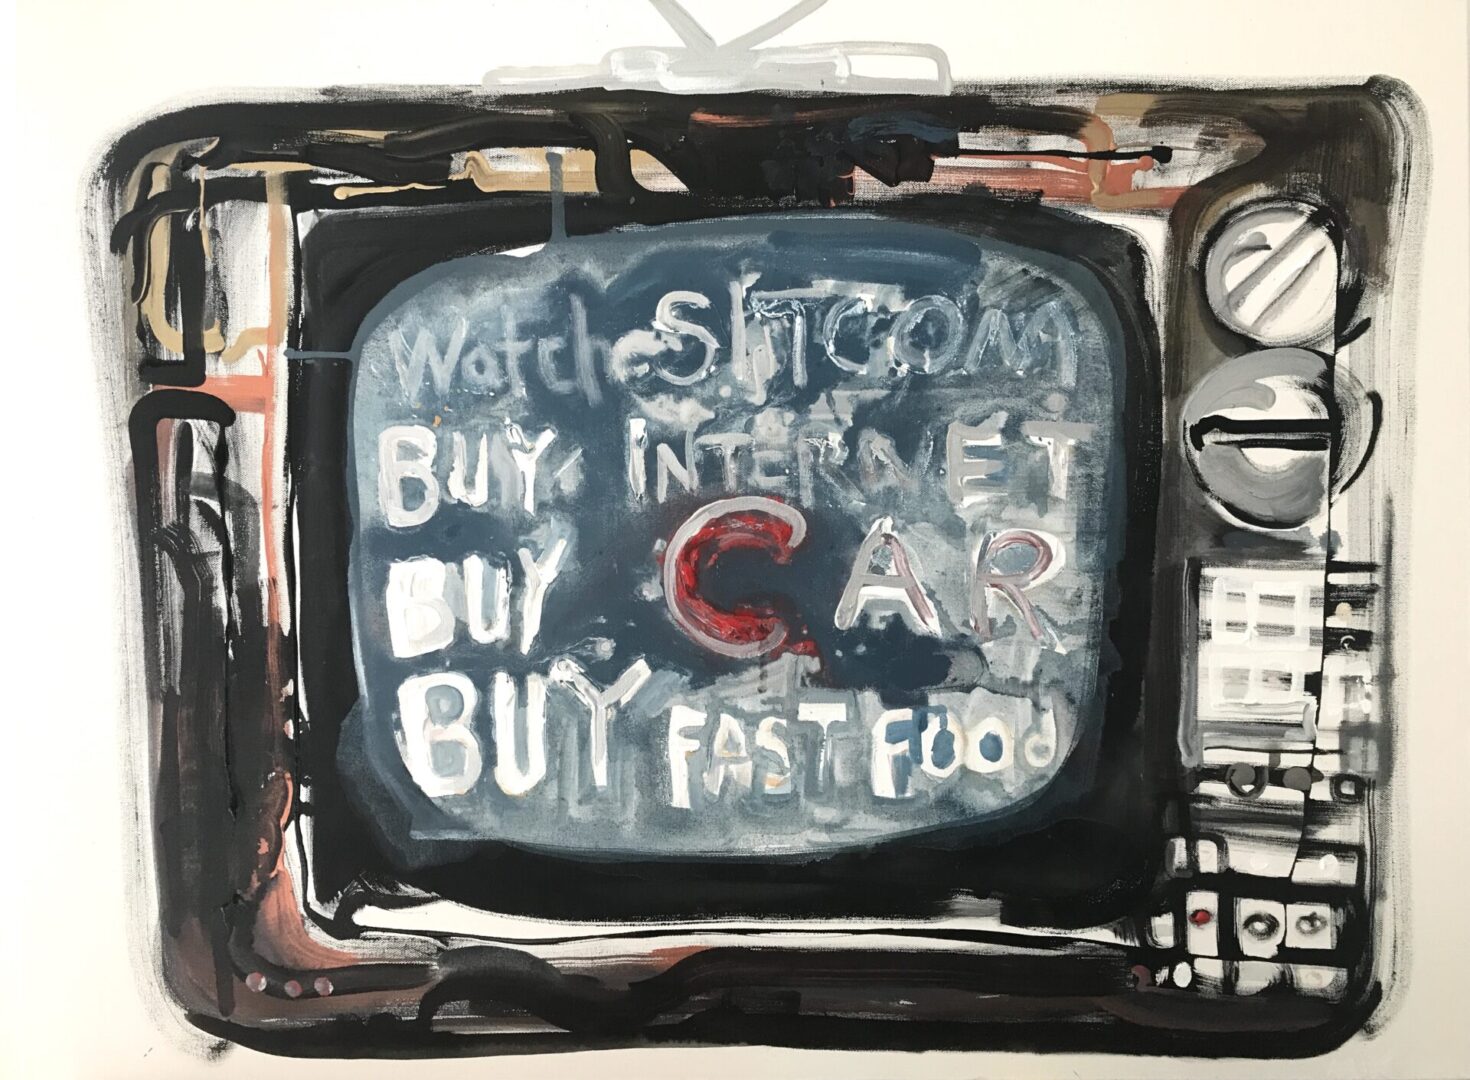 A painting of a television set